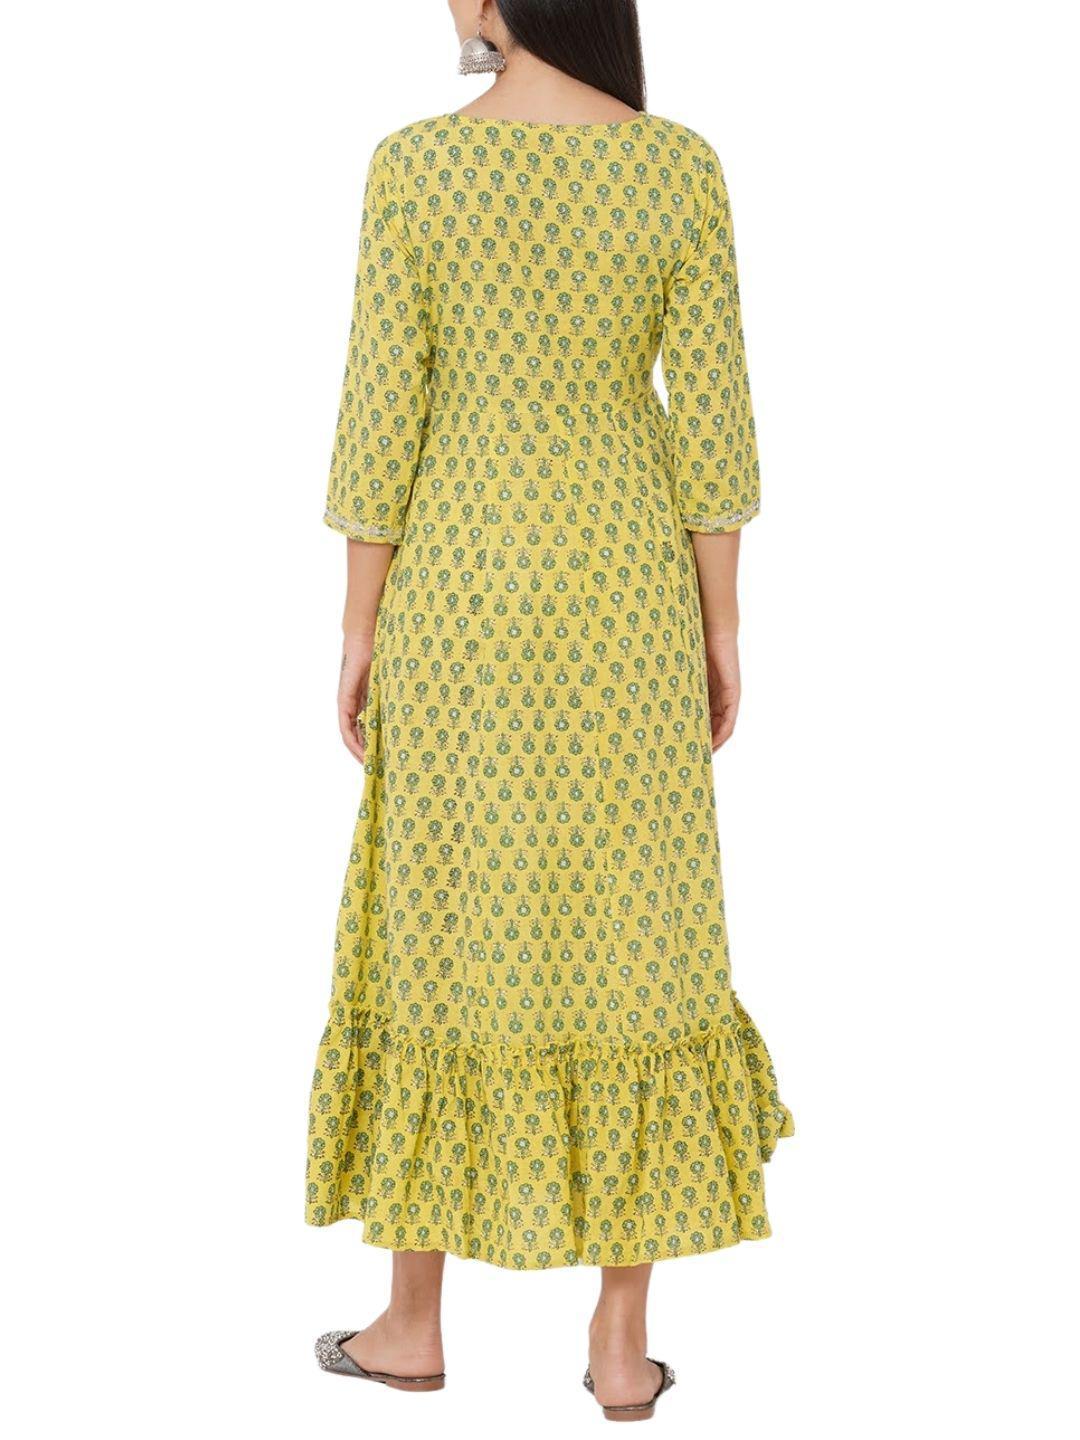 floral-block-printed-embroidered-maxi-dress-10304001YL, Women Clothing, Cotton Dress